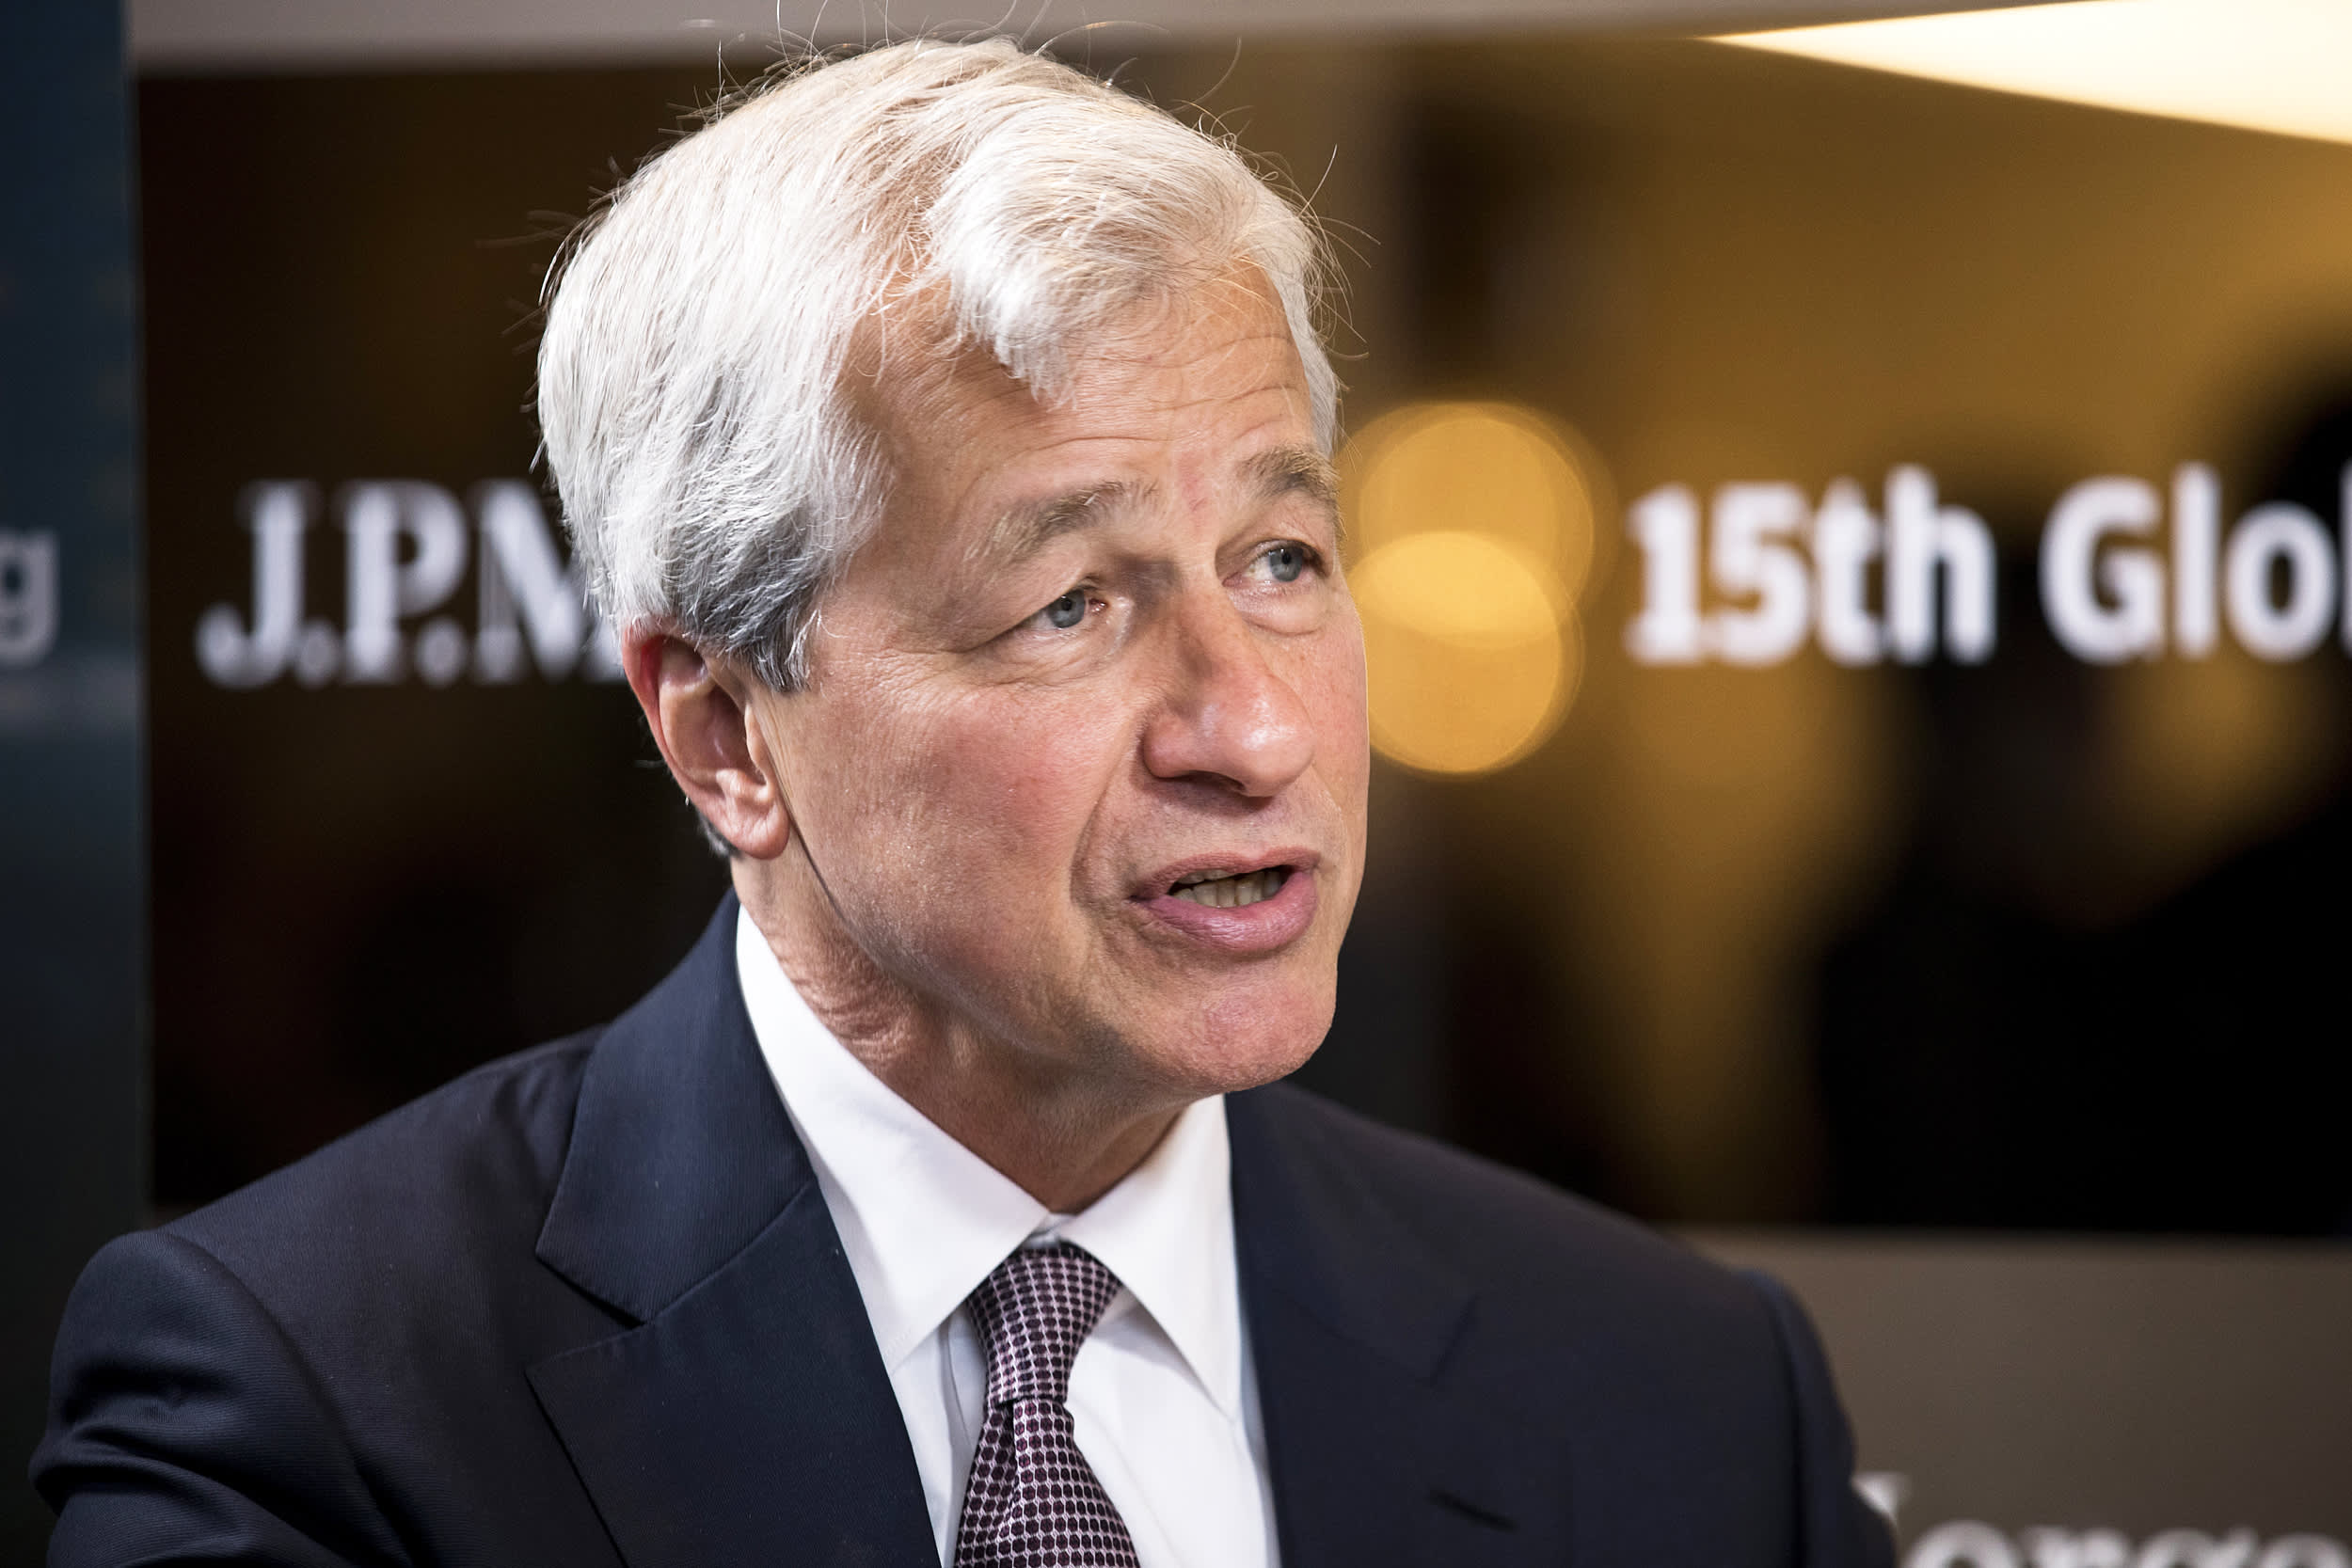 Wage inflation has arrived in a big way and Jamie Dimon says CEOs 'shouldn't be crybabies about it'